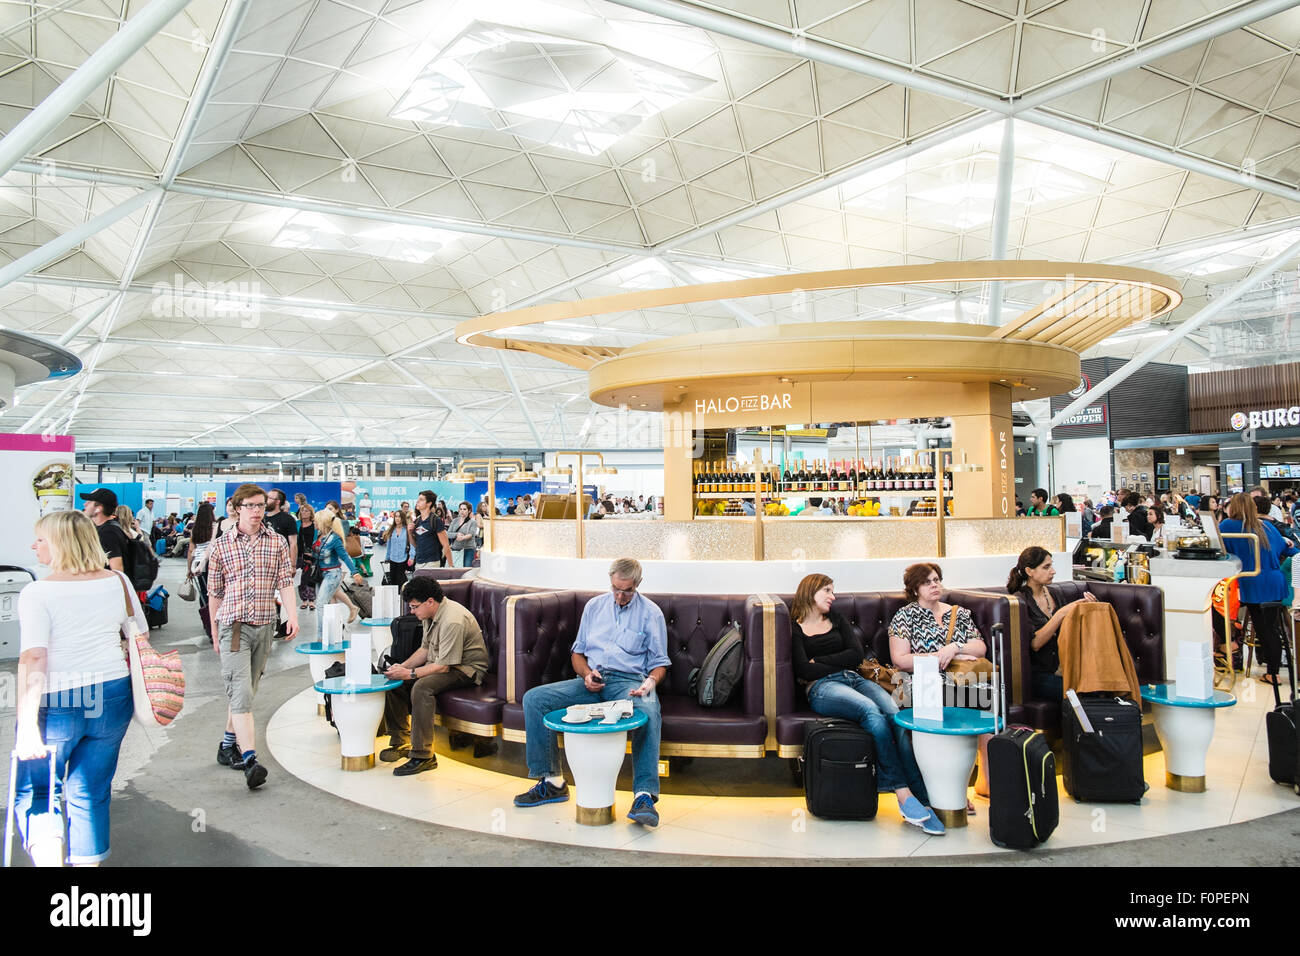 Passengers,travellers with luggage and shops,currency exchange outlets at Departures Terminal at Stansted Airport,London,U.K. Stock Photo